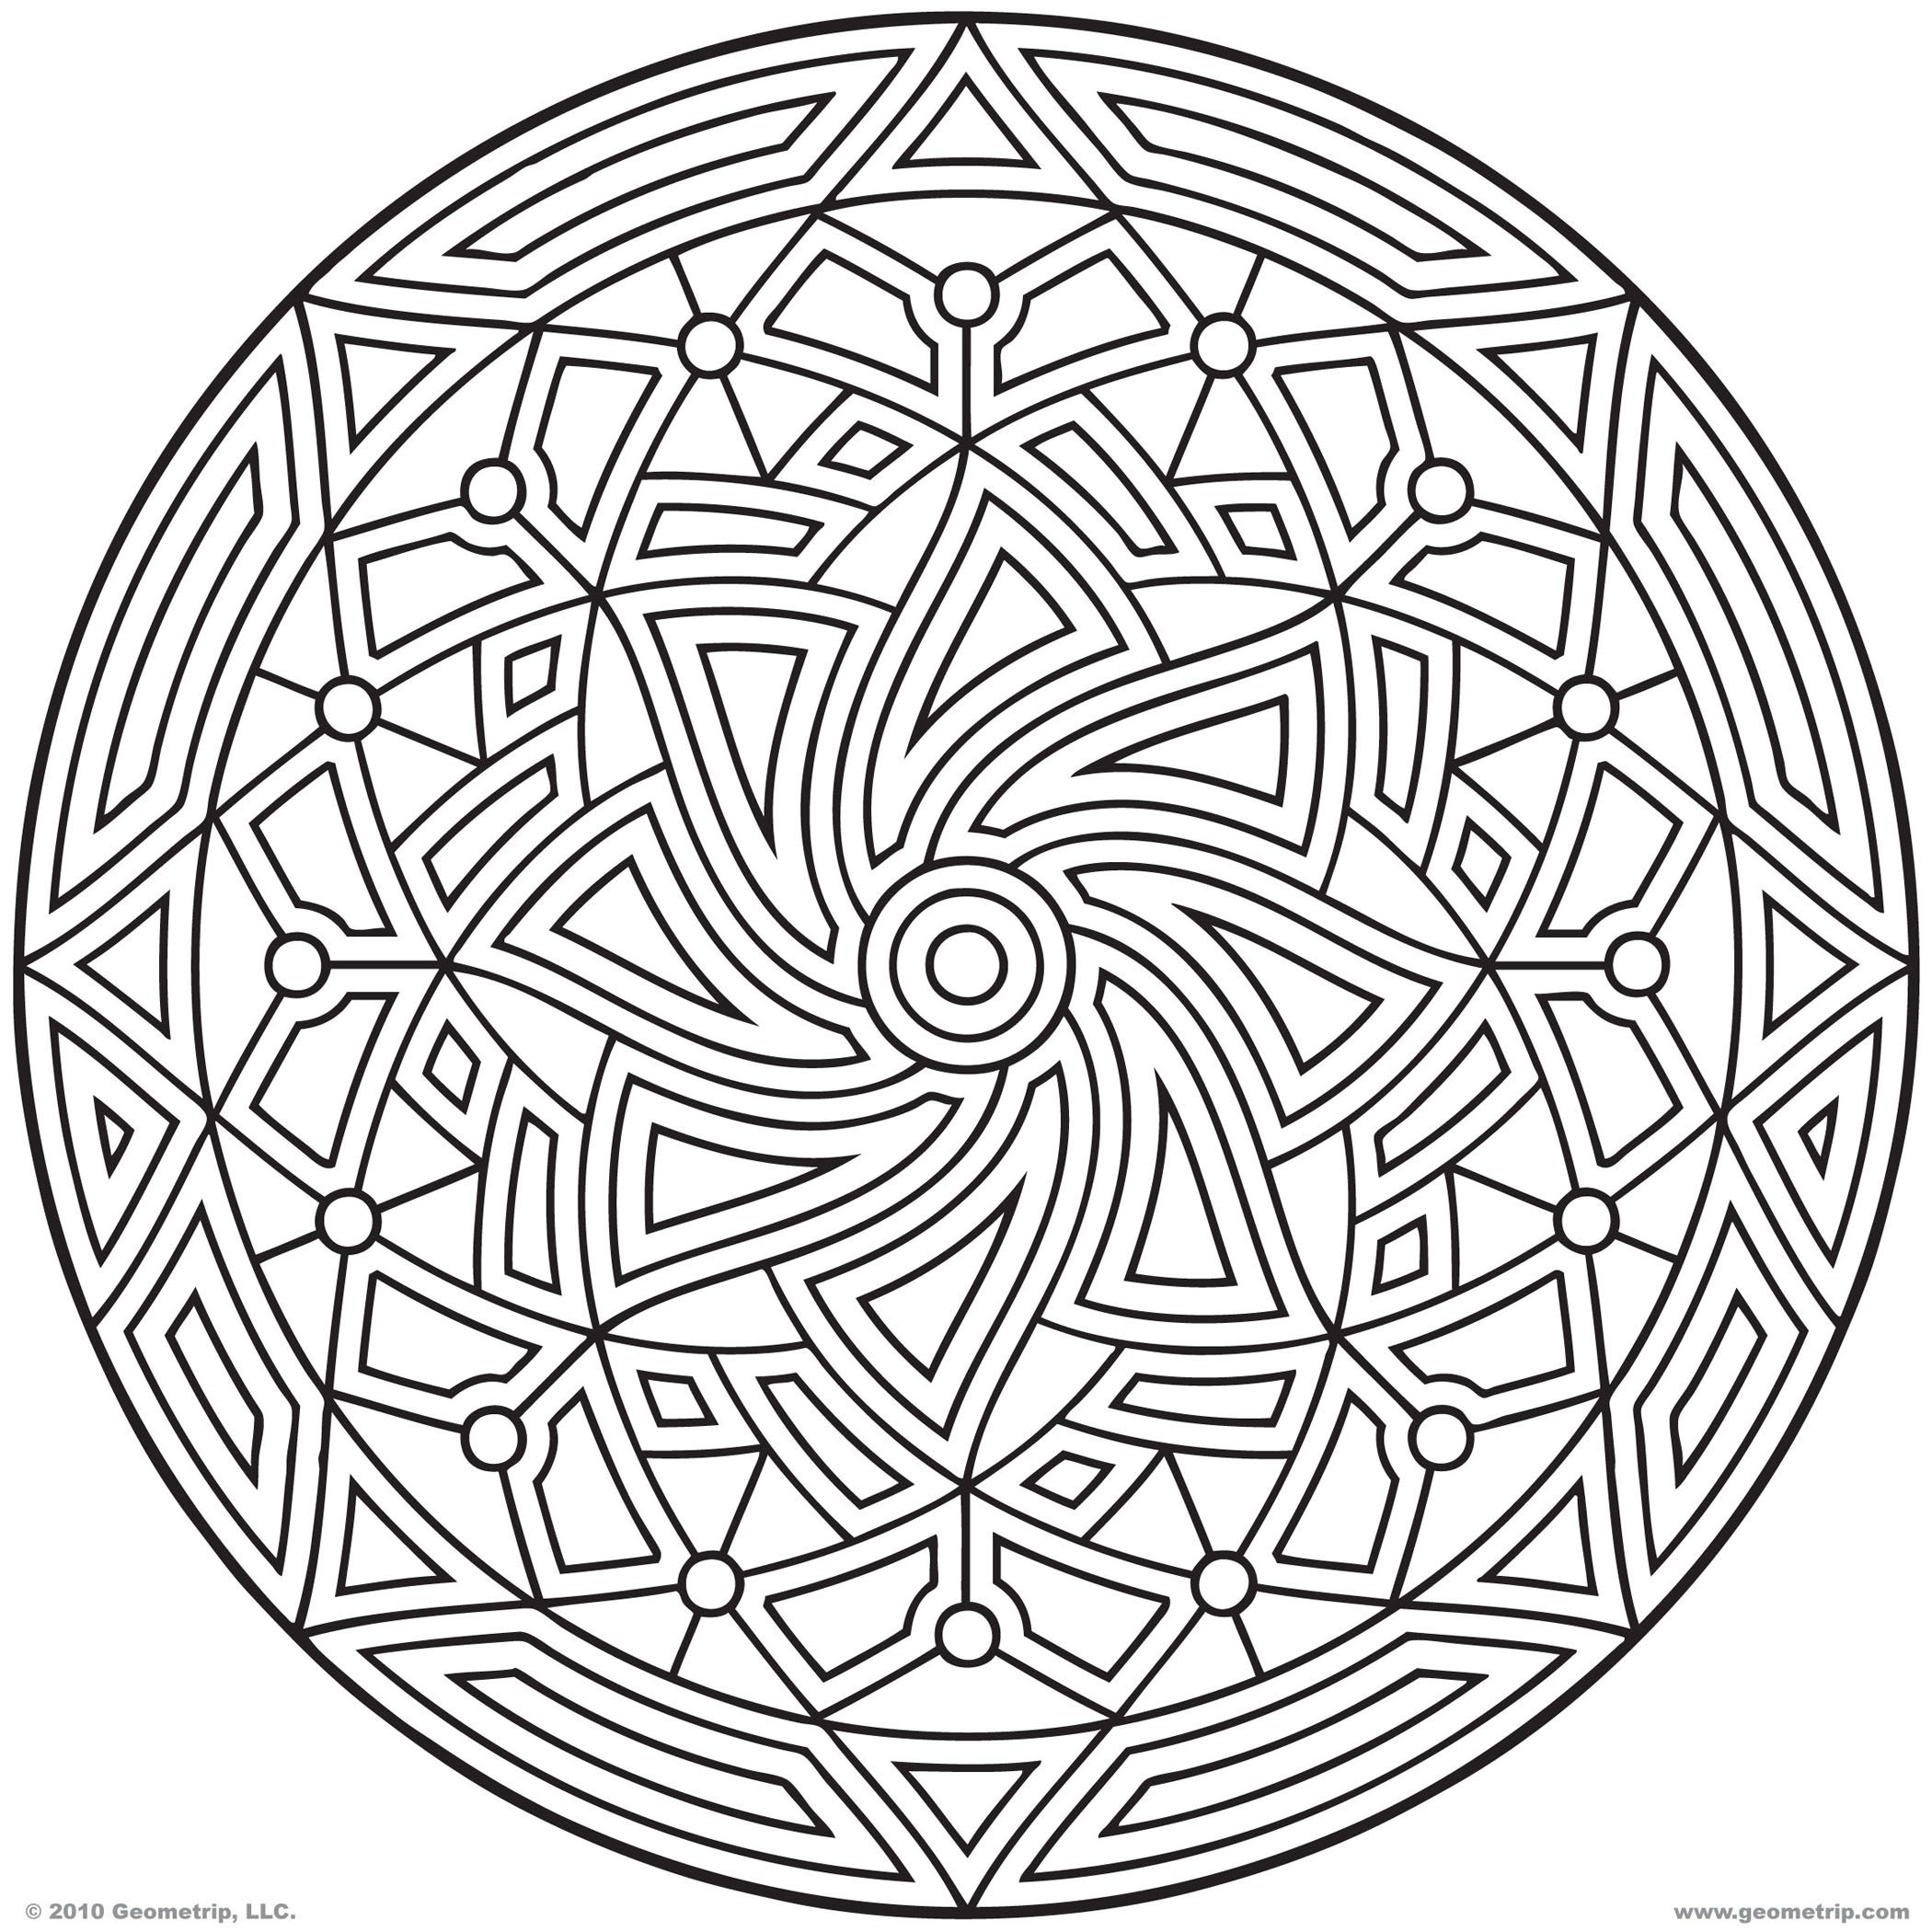 1000+ images about Coloring pages on Pinterest